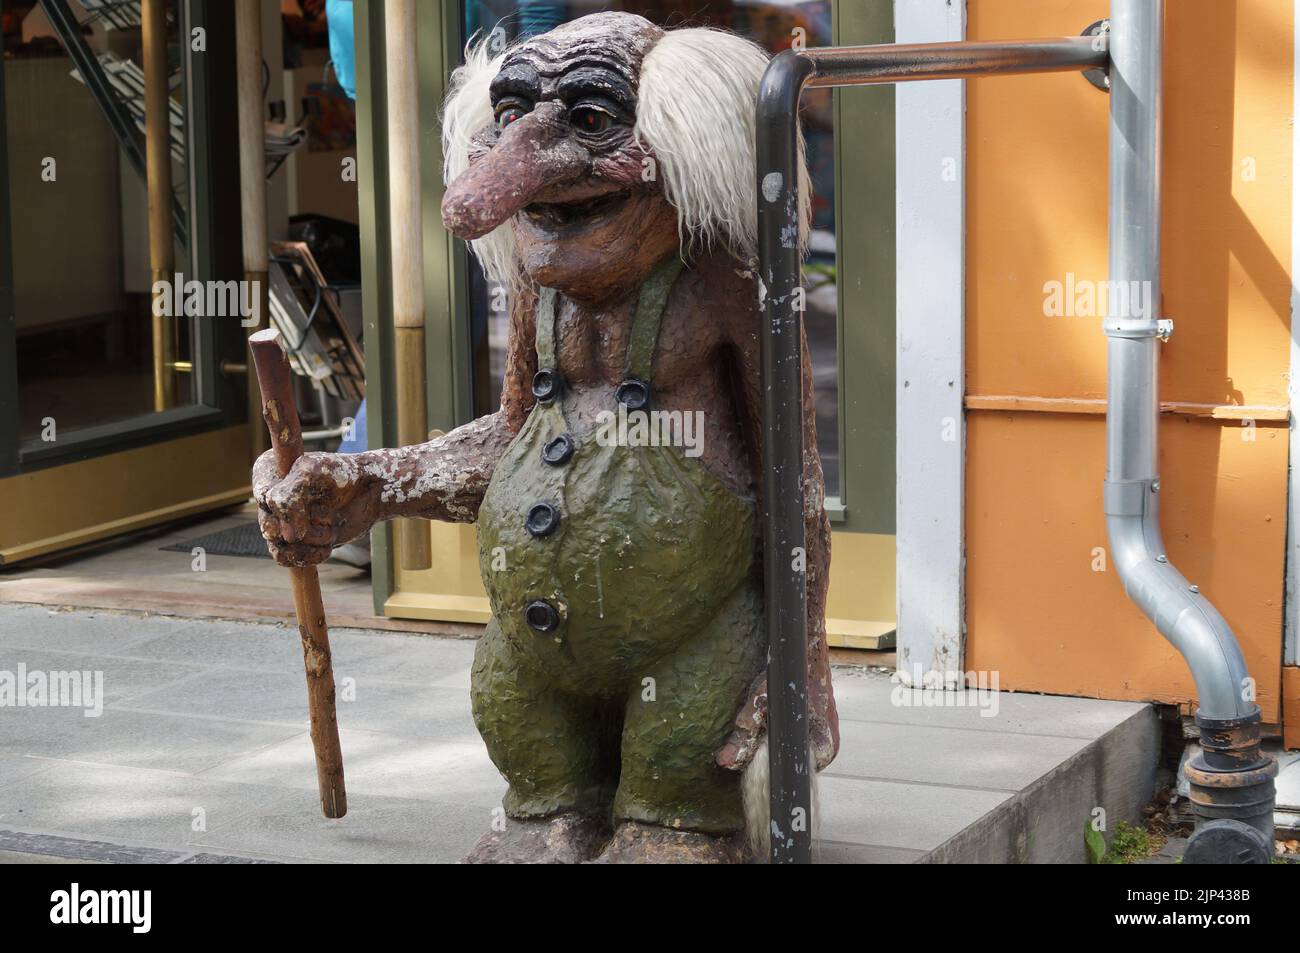 A closeup shot of a troll sculpture holding a wooden stick in front of a shop in Norway Stock Photo